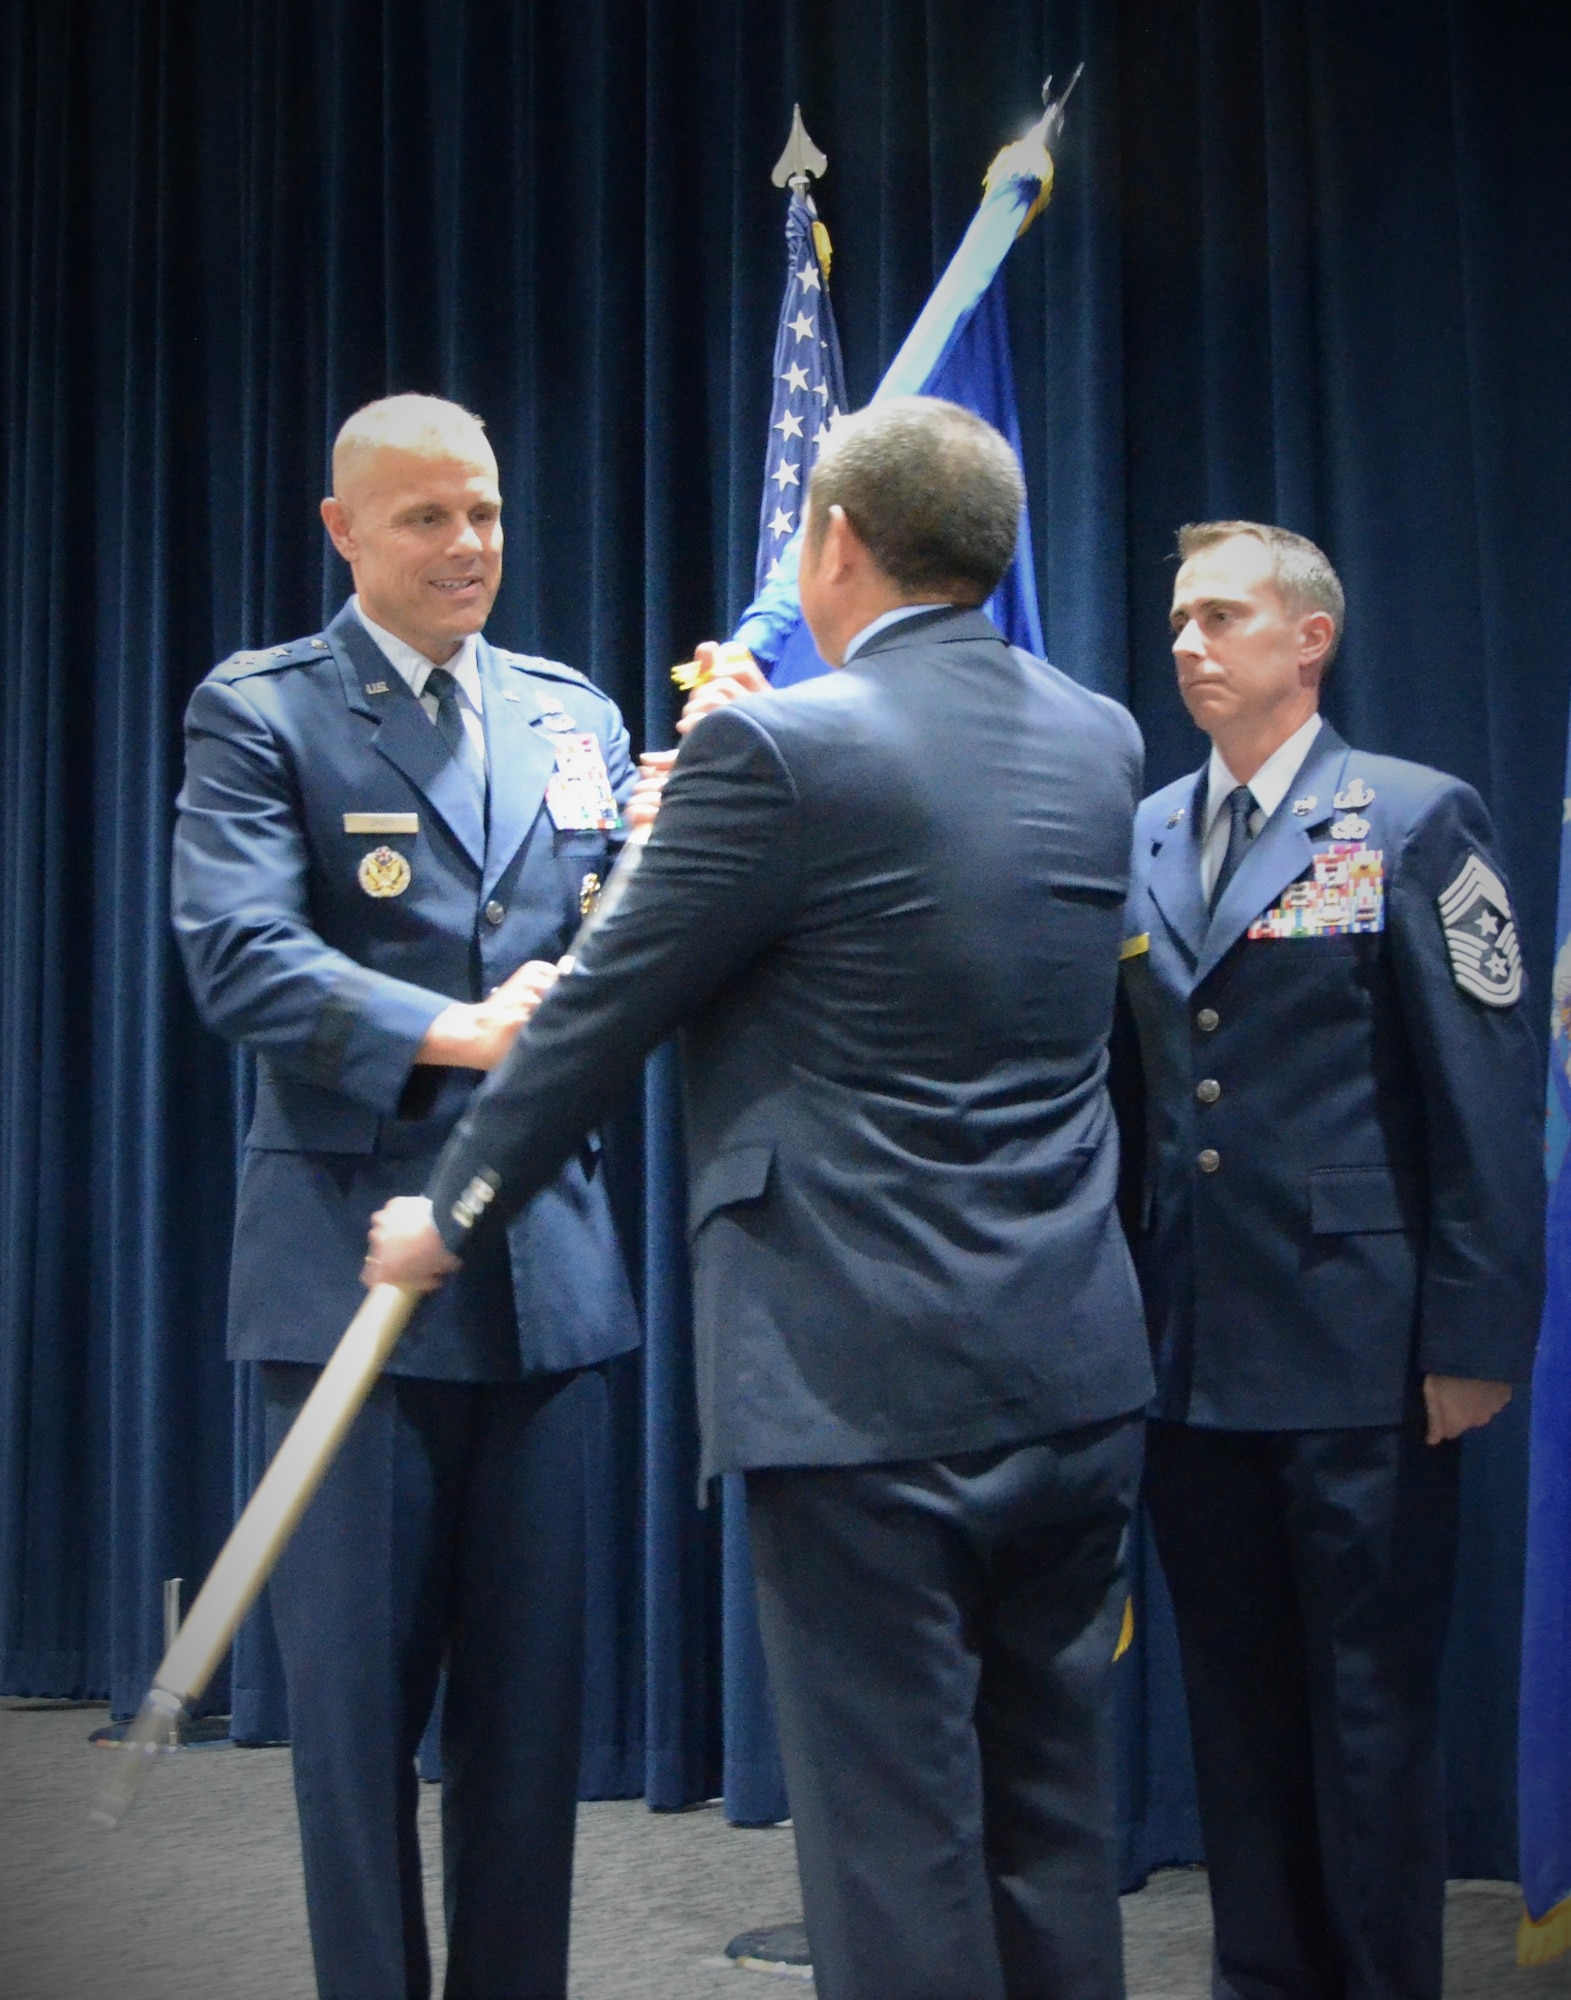 Edwin Oshiba relinquishes the Air Force Civil Engineer Center flag to Maj. Gen. Bradley D. Spacy, Commander, Air Force Installation and Mission Support Center during a change of leadership ceremony at Lackland Air Force Base, Texas, Oct. 29, 2018.